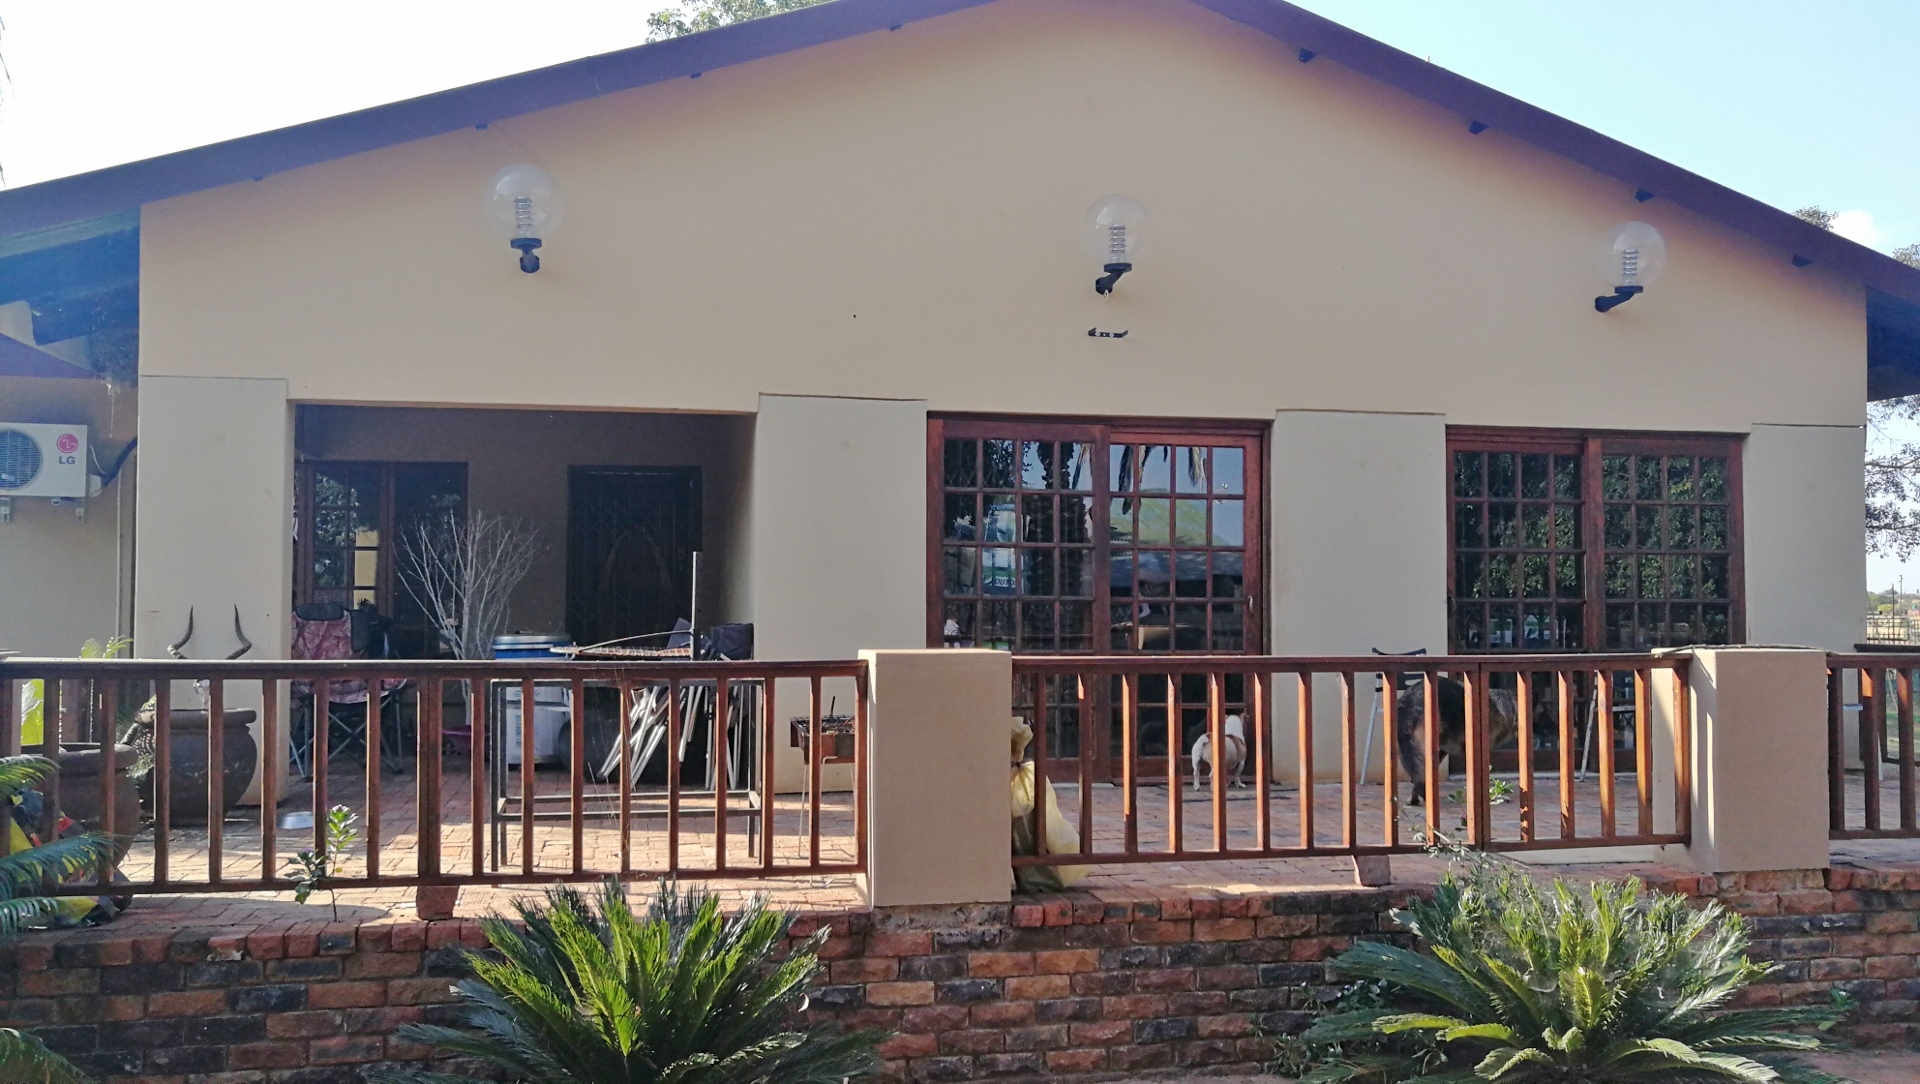 14 Bedroom Property for Sale in Baskoppies A H Limpopo